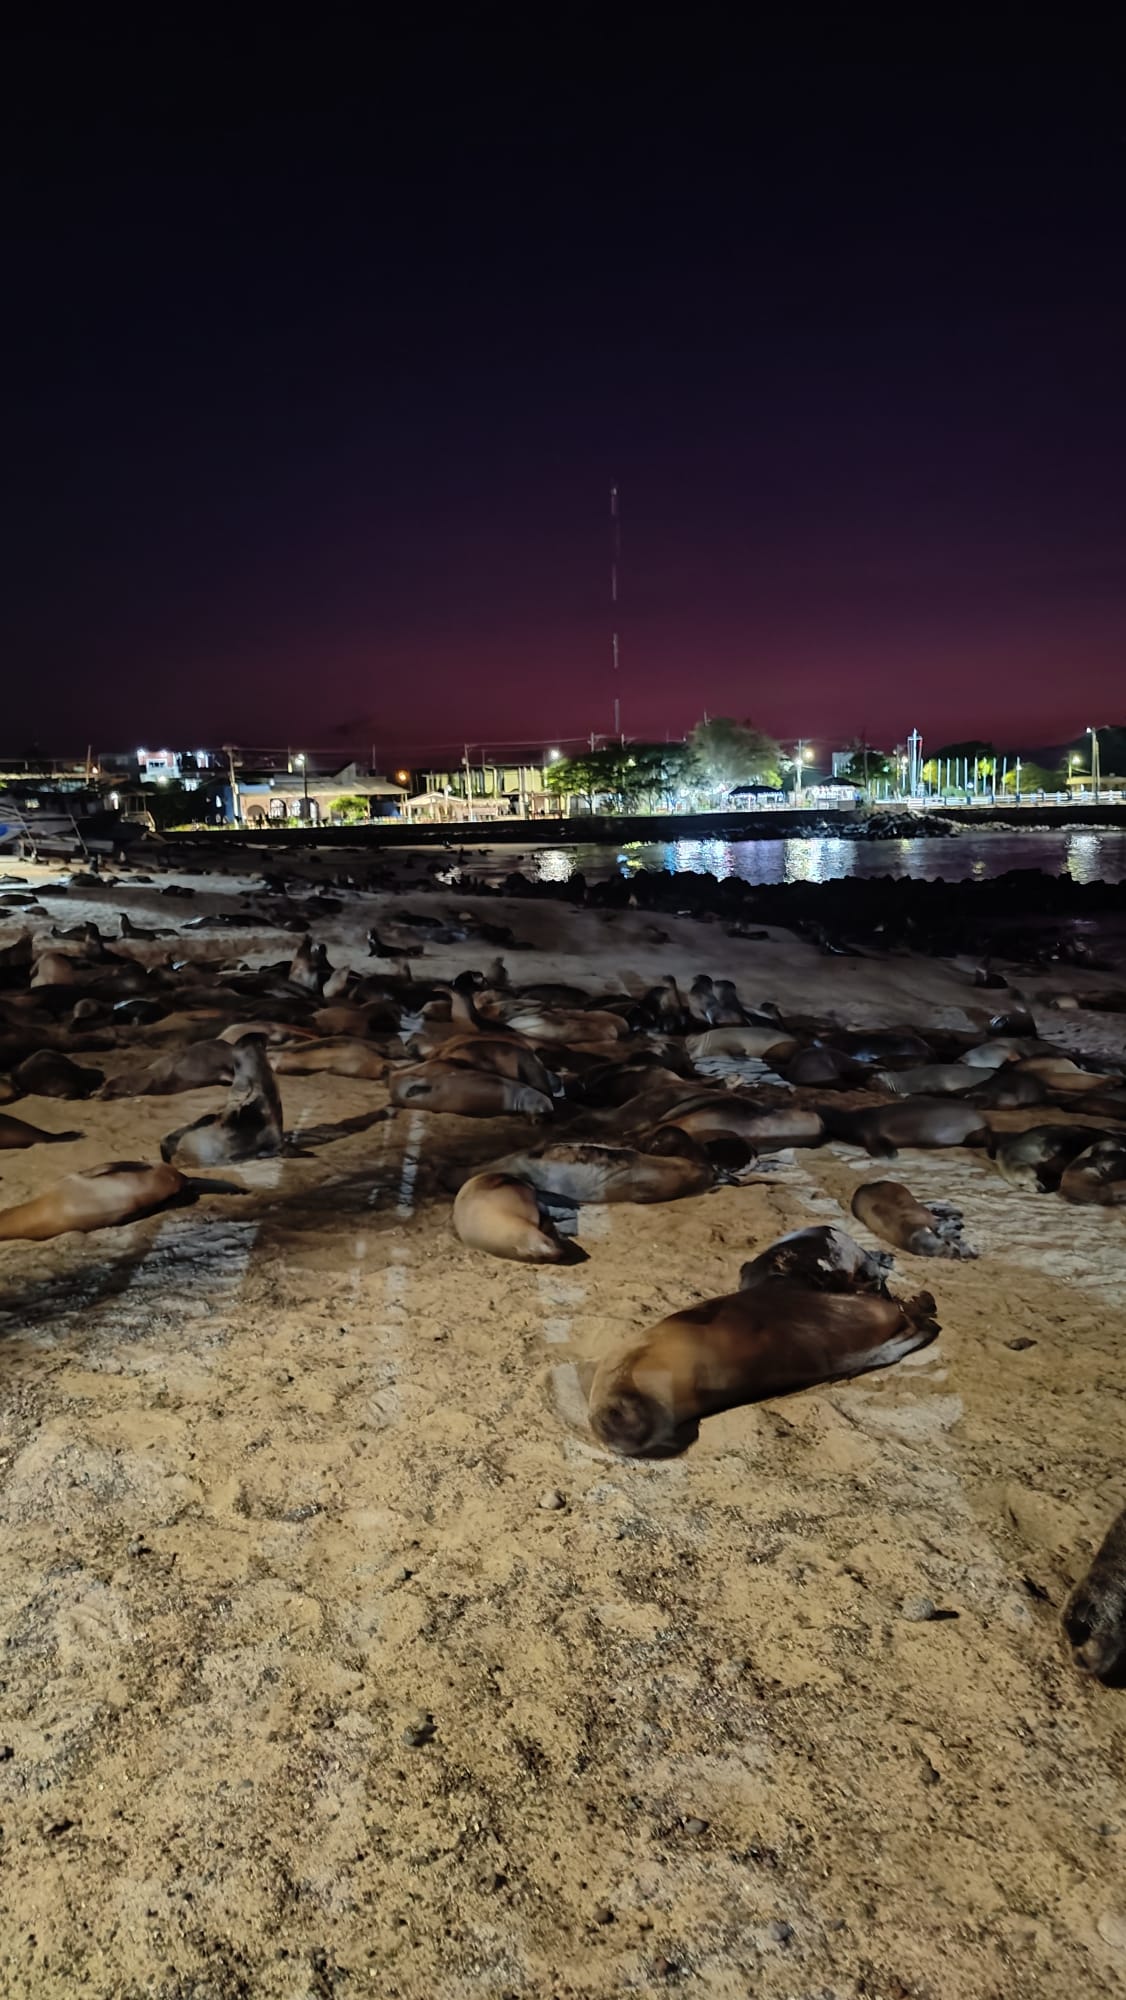 Pictured is the beach at night. The background sky is a dark purple with lights from buildings shining through. On the beach itself are a ton of sea lions laying down for the night. 